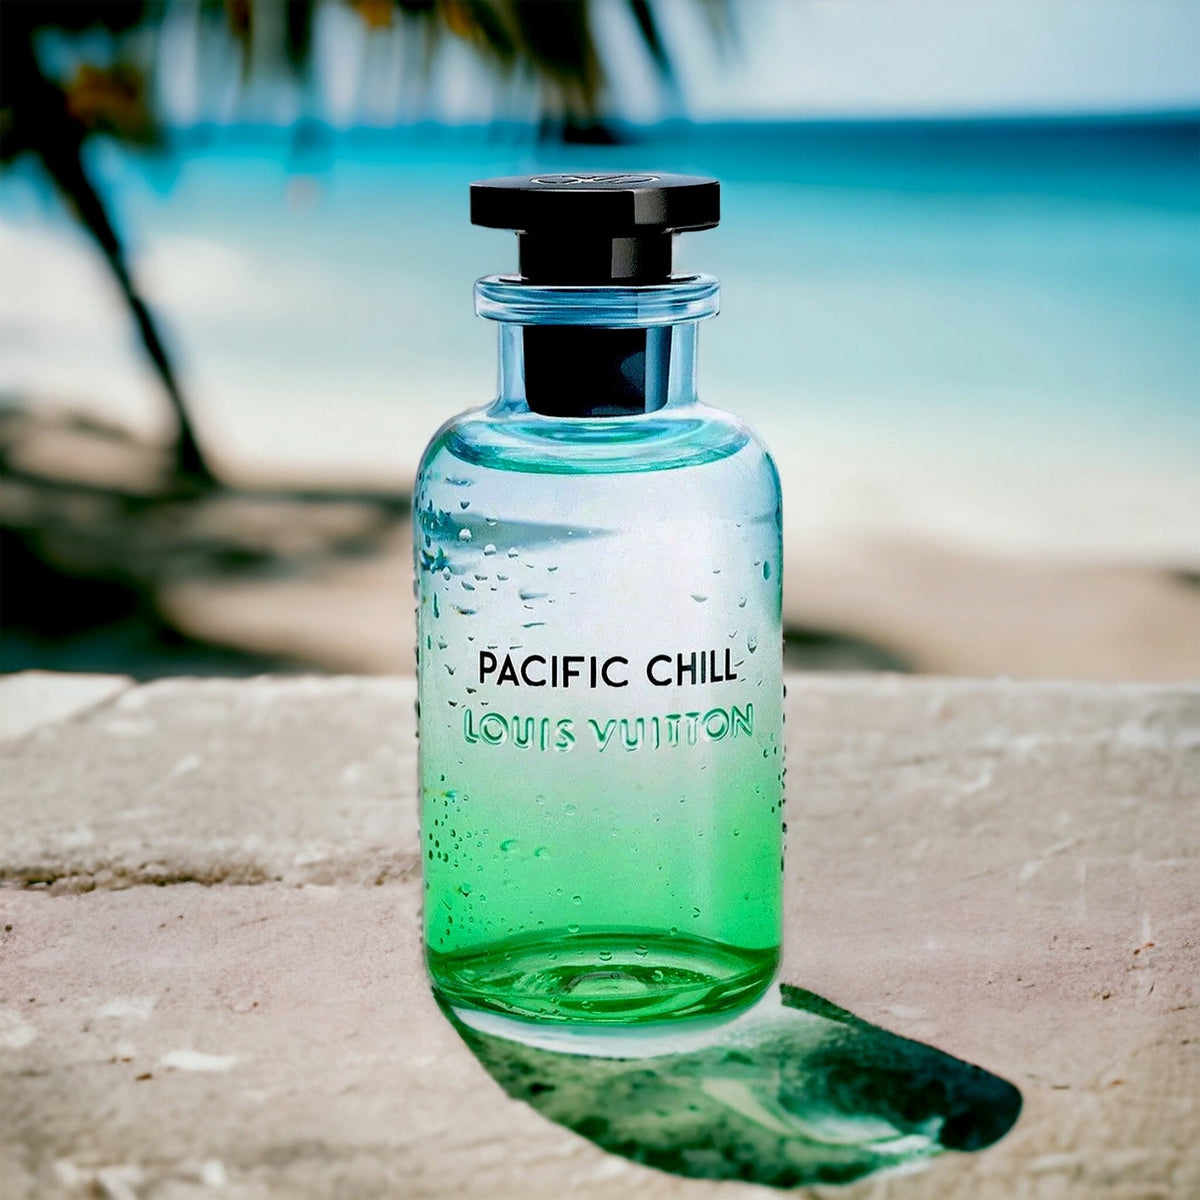 Pacific Chill Louis Vuitton – PerfumerySamples